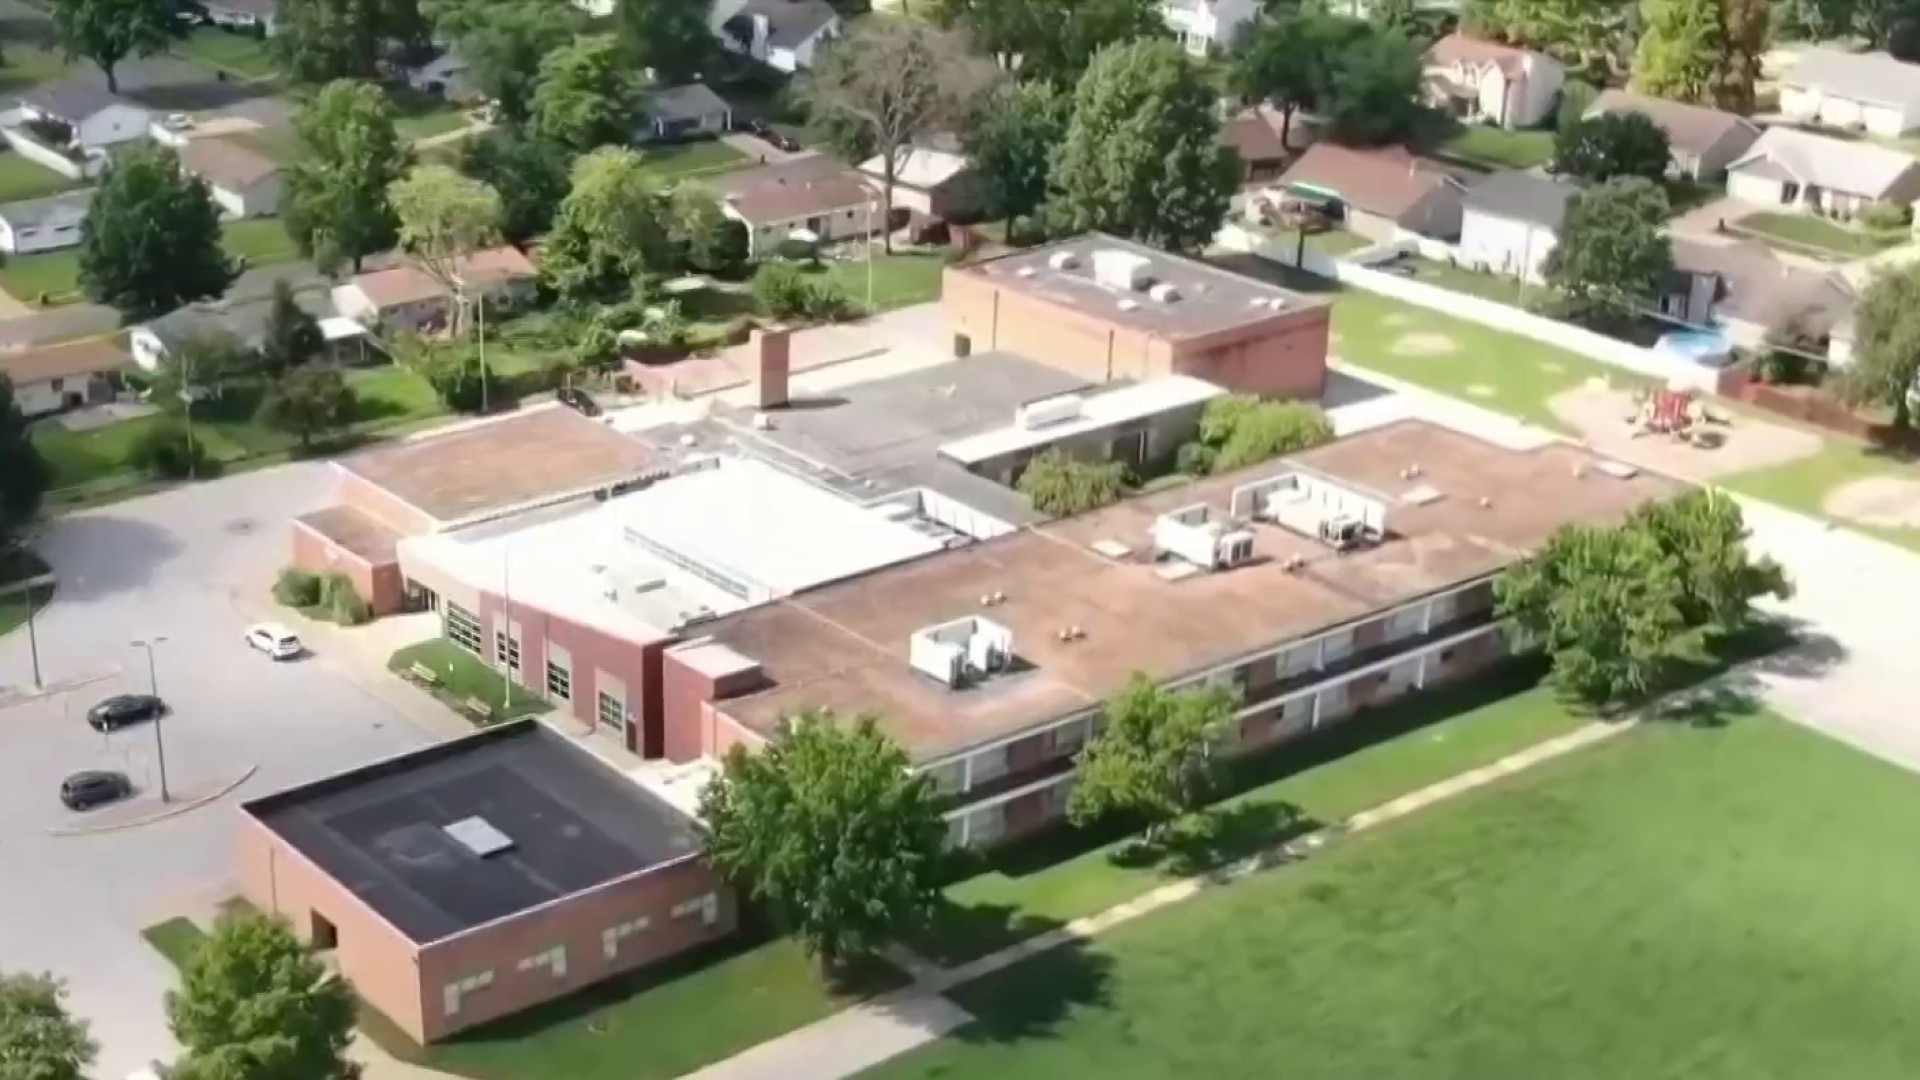 Watch NBC Nightly News with Lester Holt Excerpt: High radioactive lead  levels found at Missouri elementary school 